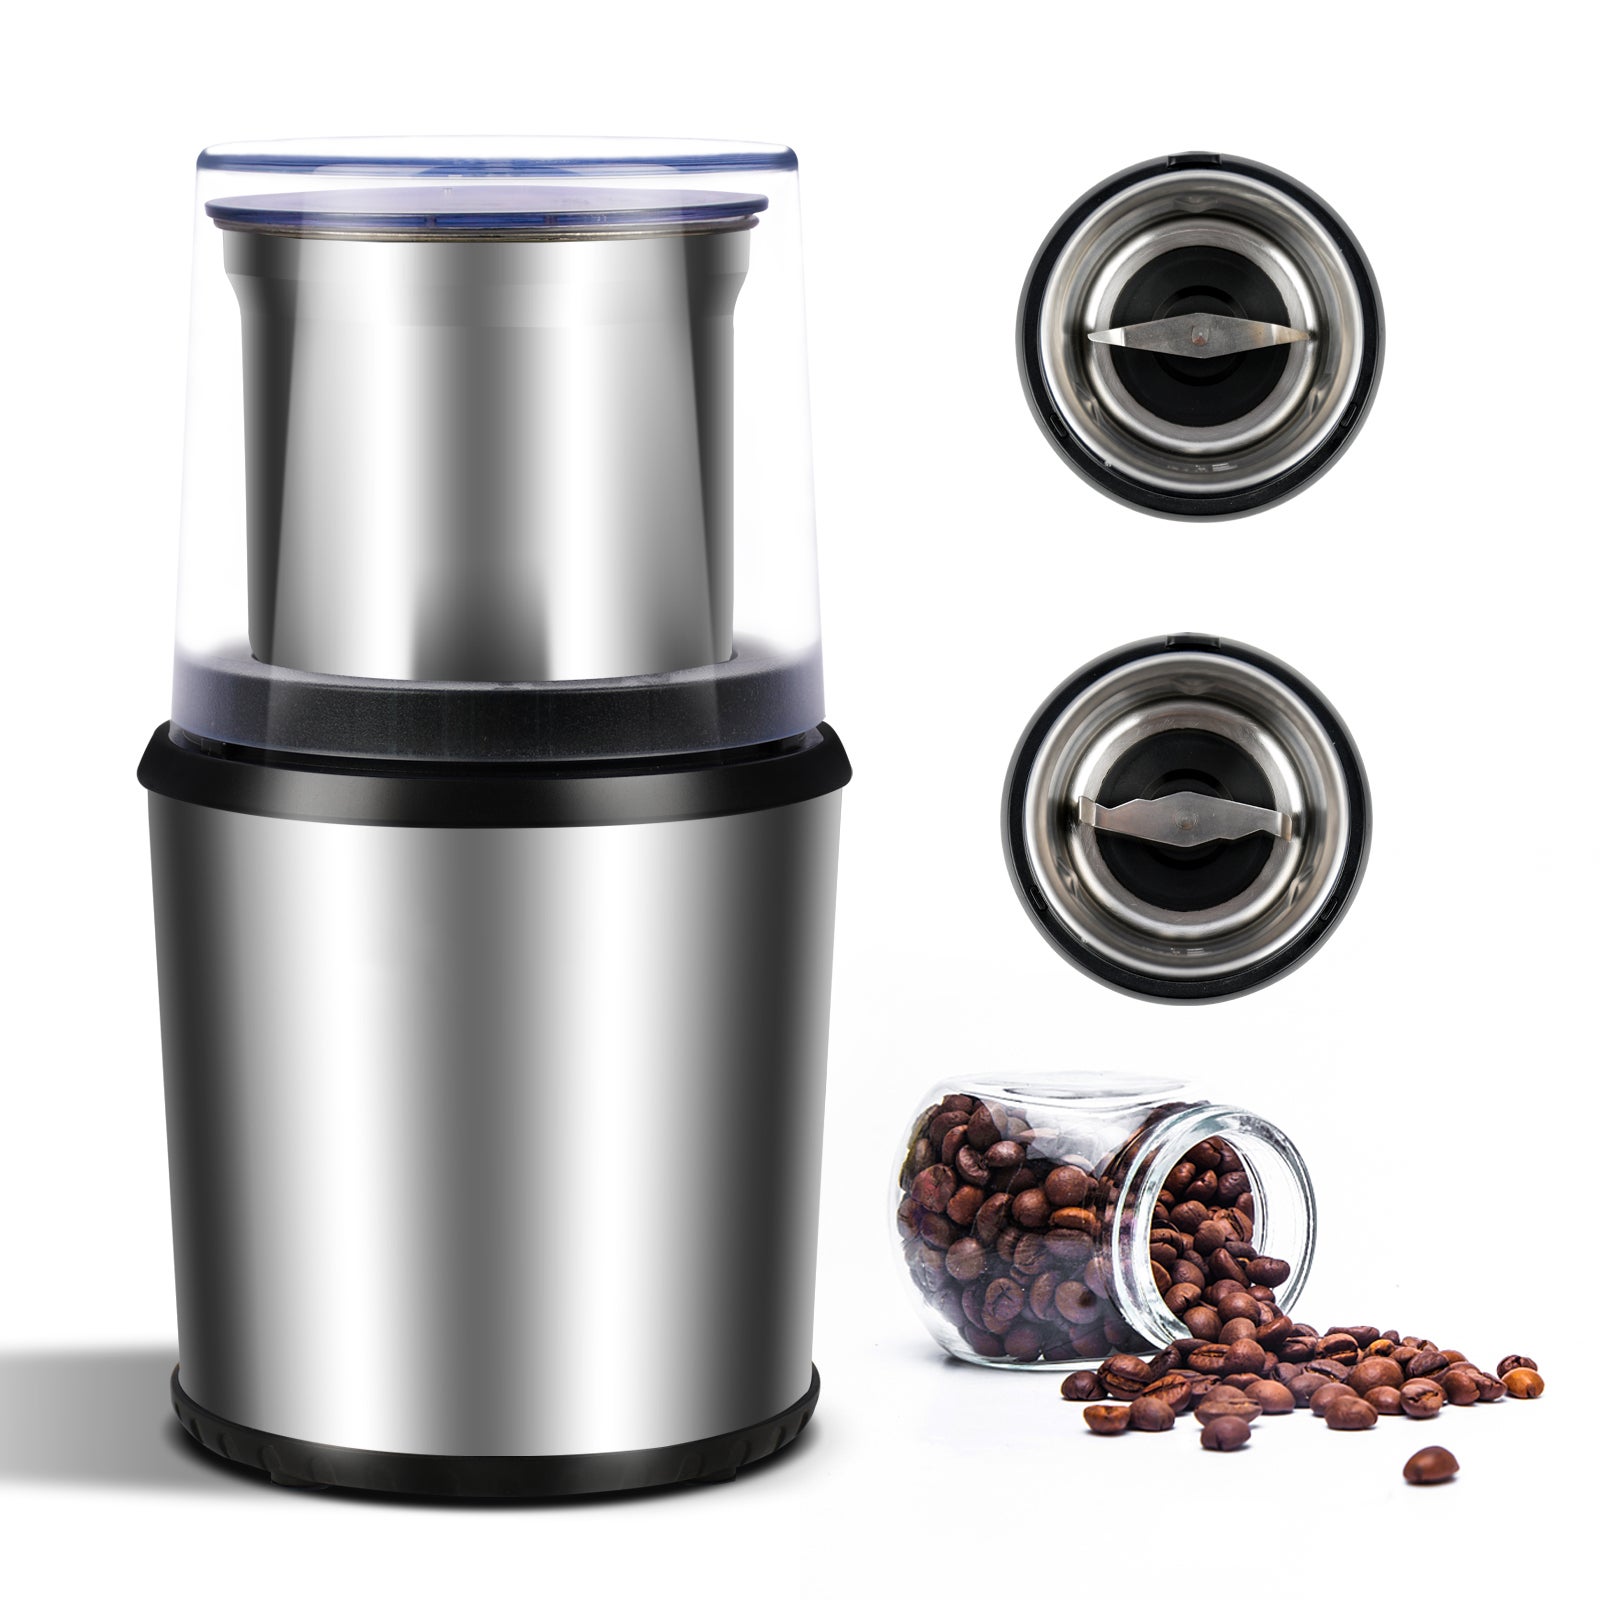 Stainless Steel Electric Coffee Spice Grinder 200W